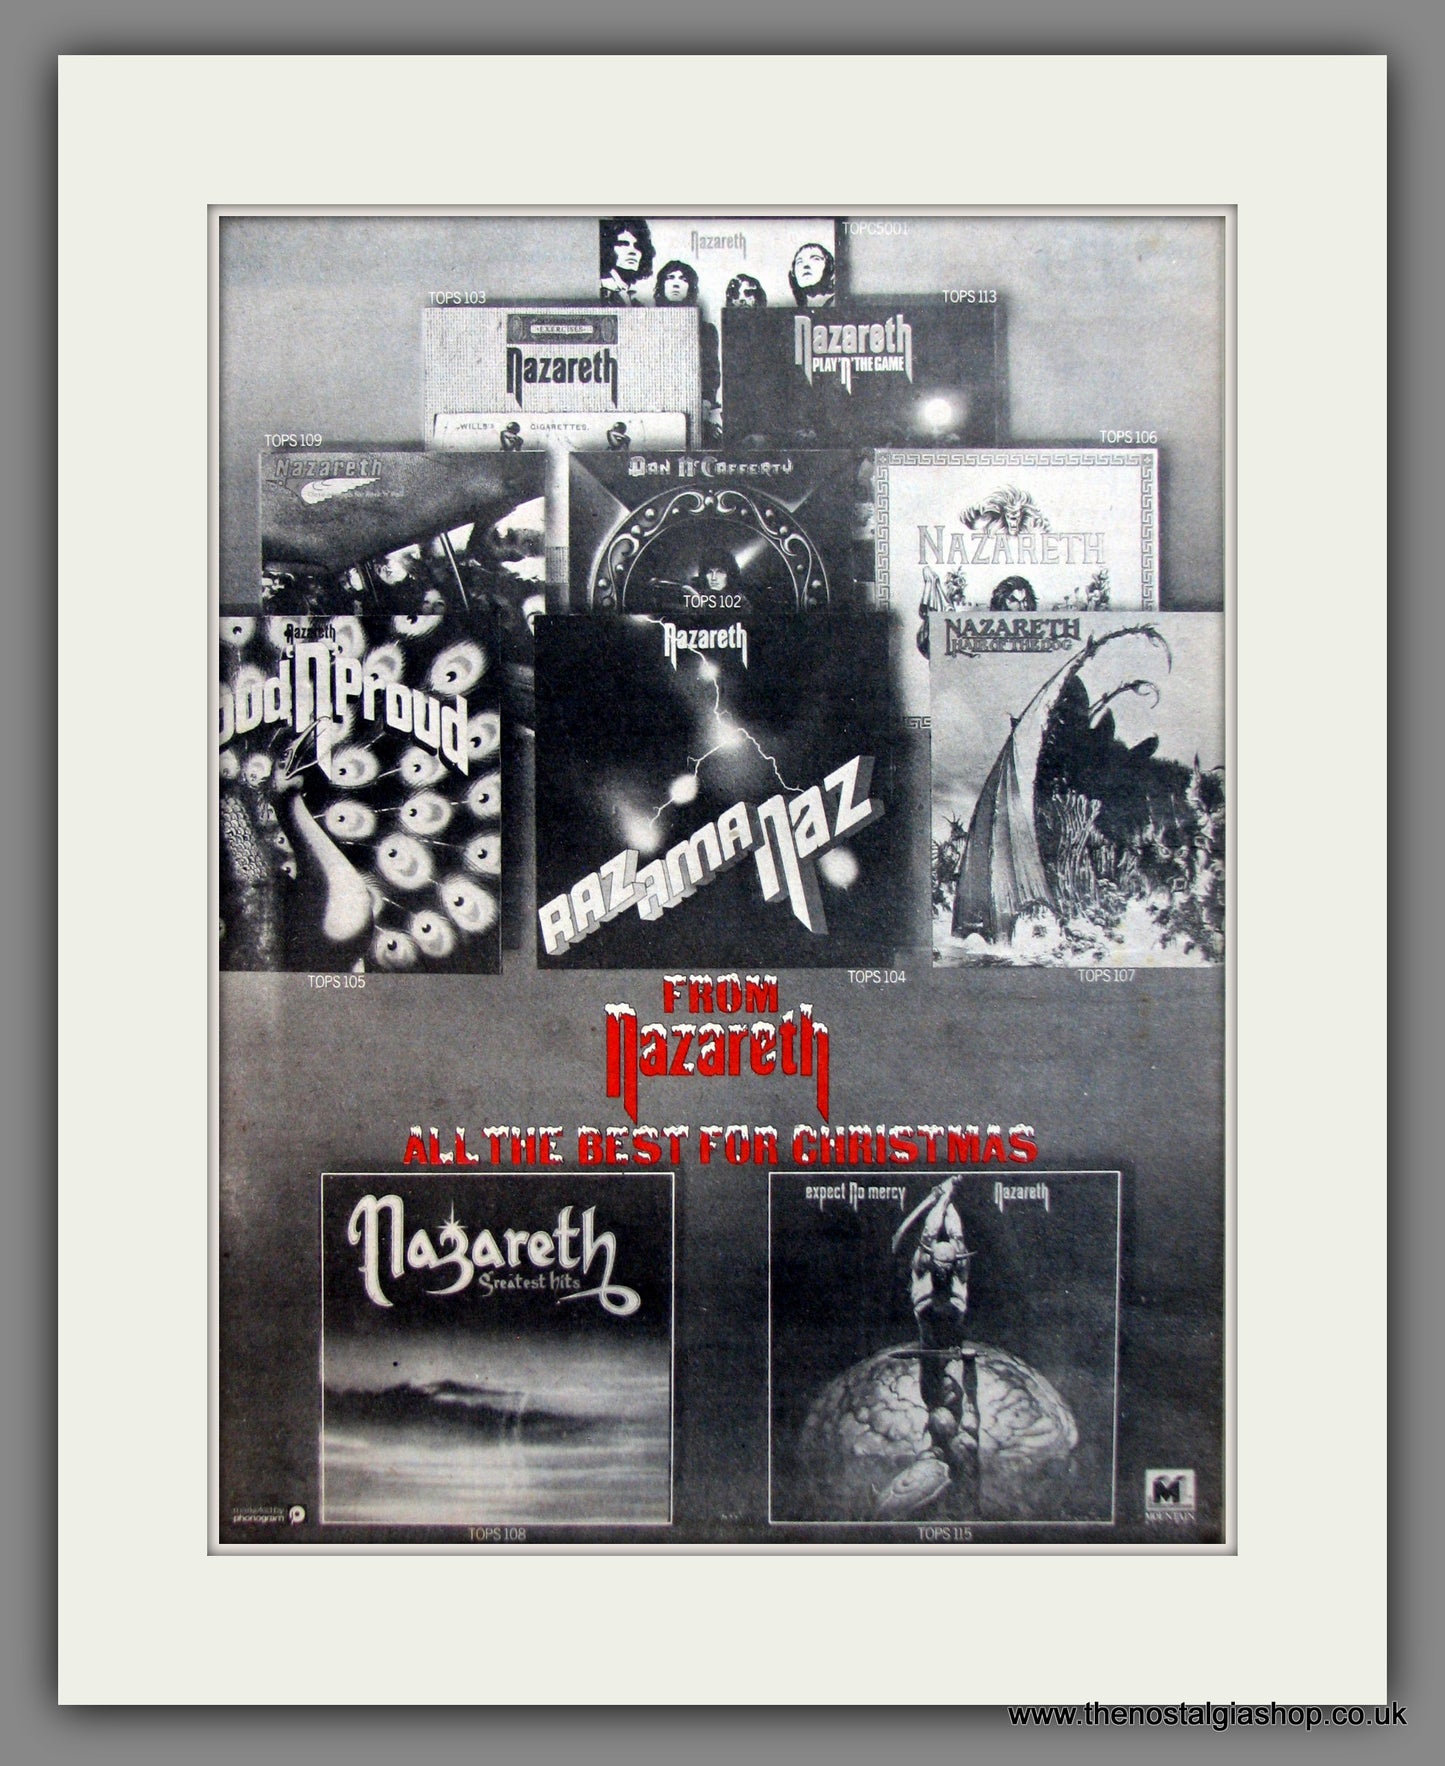 Nazareth. All The Best For Christmas. Original Advert 1977 (ref AD12090)